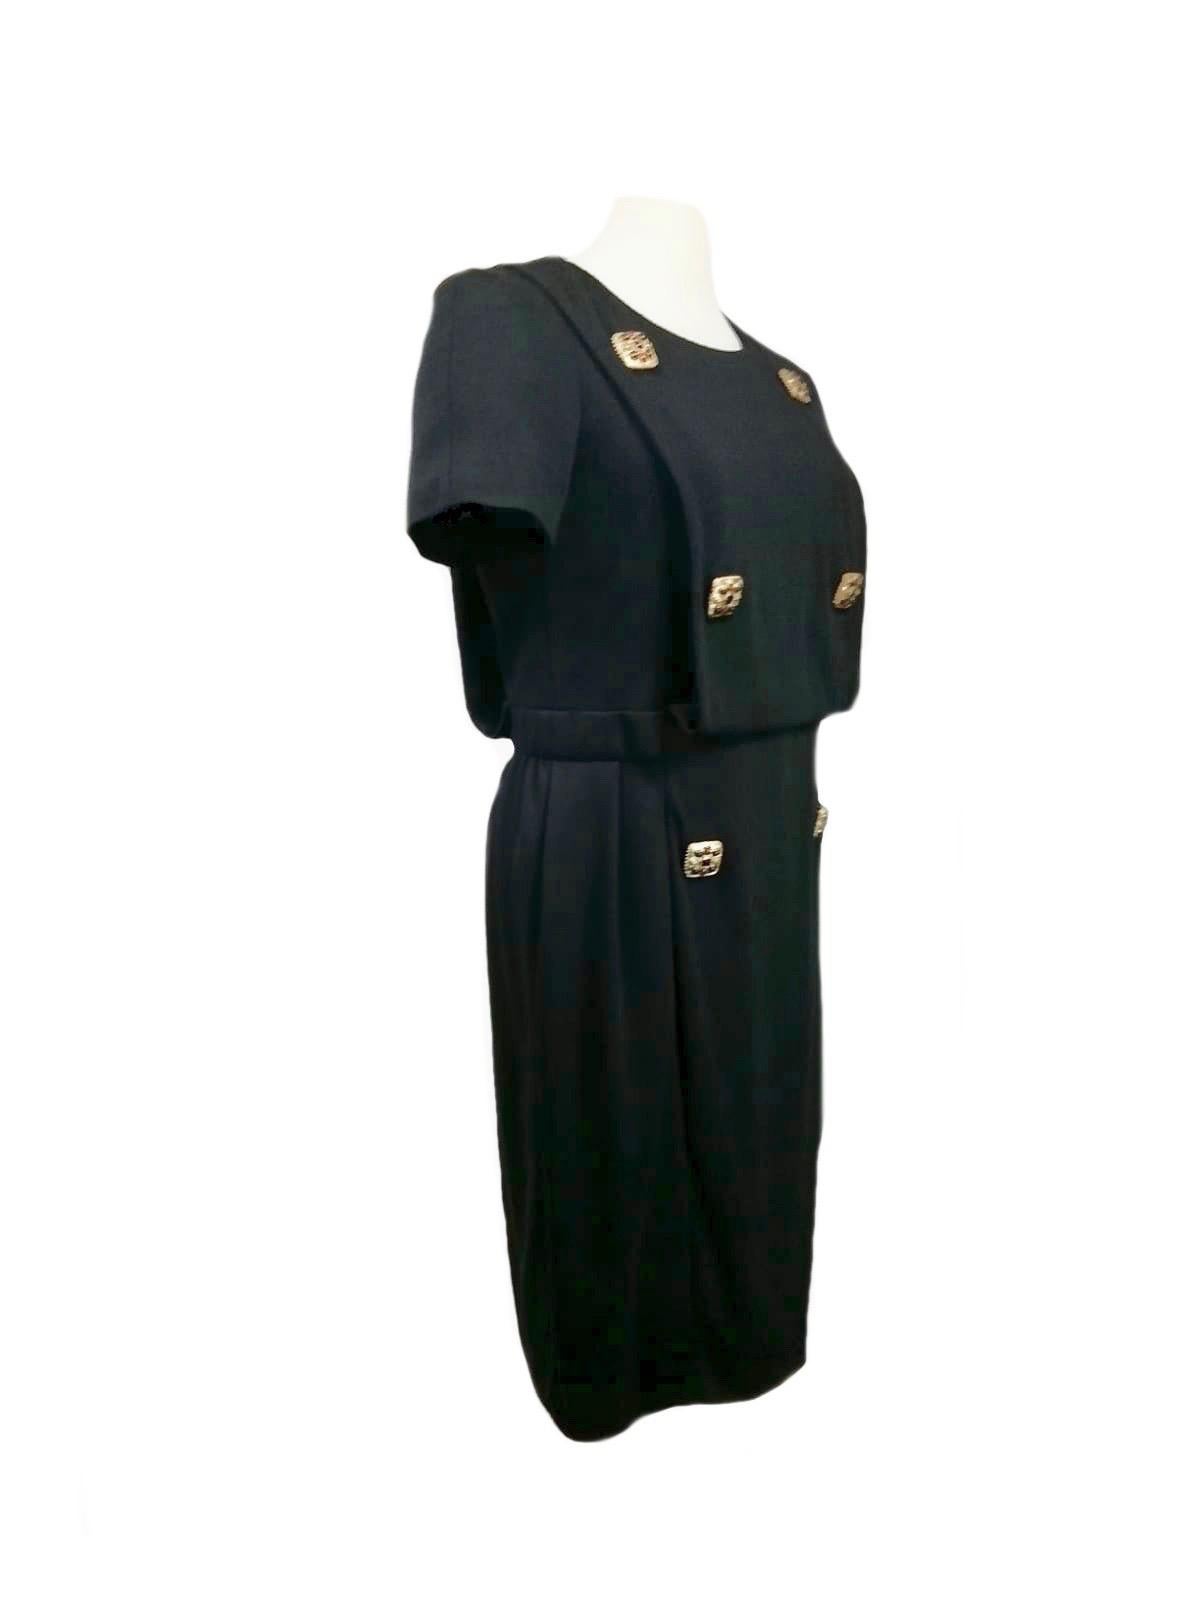 Chanel black wool dress pre fall 2011 Paris Byzance  FR 46 In Excellent Condition For Sale In Rubiera, RE